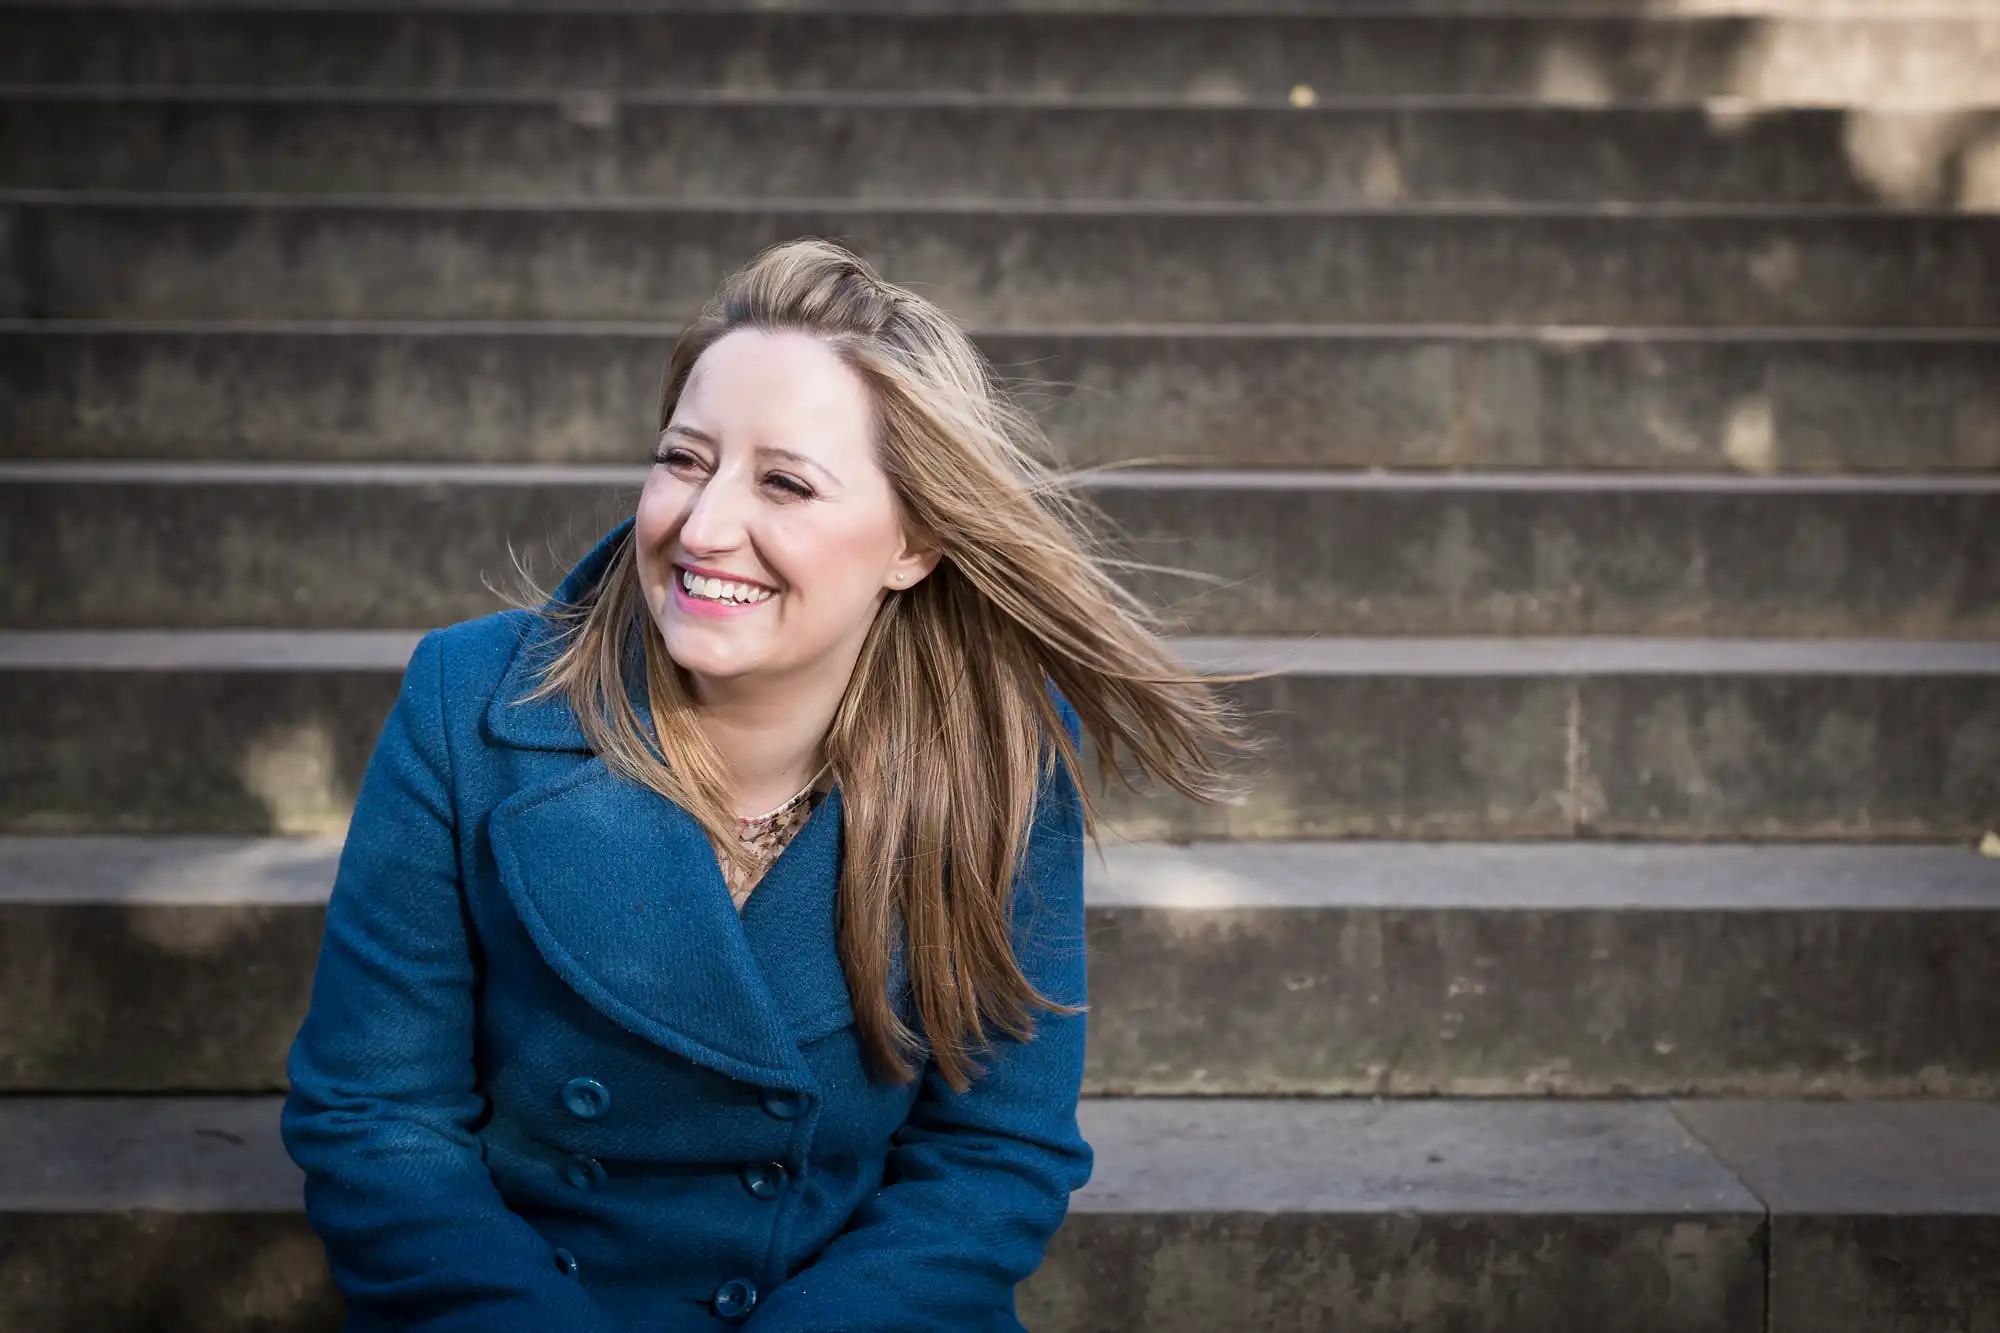 A woman in a blue coat laughing while sitting on outdoor steps. her hair blows slightly in the breeze.